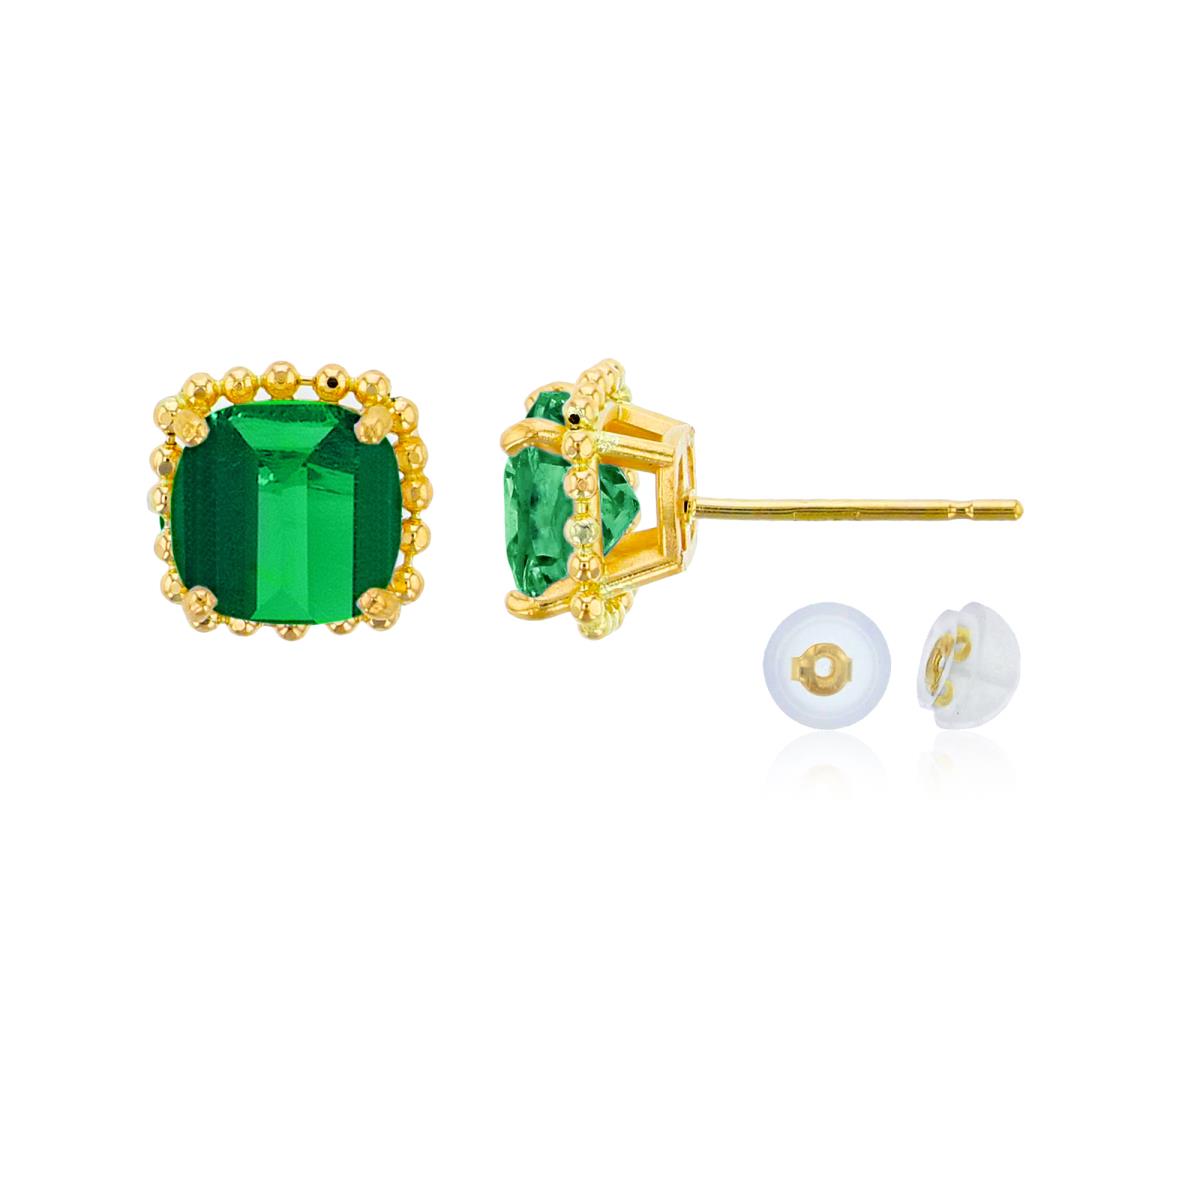 10K Yellow Gold 6x6mm Cushion Cut Created Emerald Bead Frame Stud Earring with Silicone Back